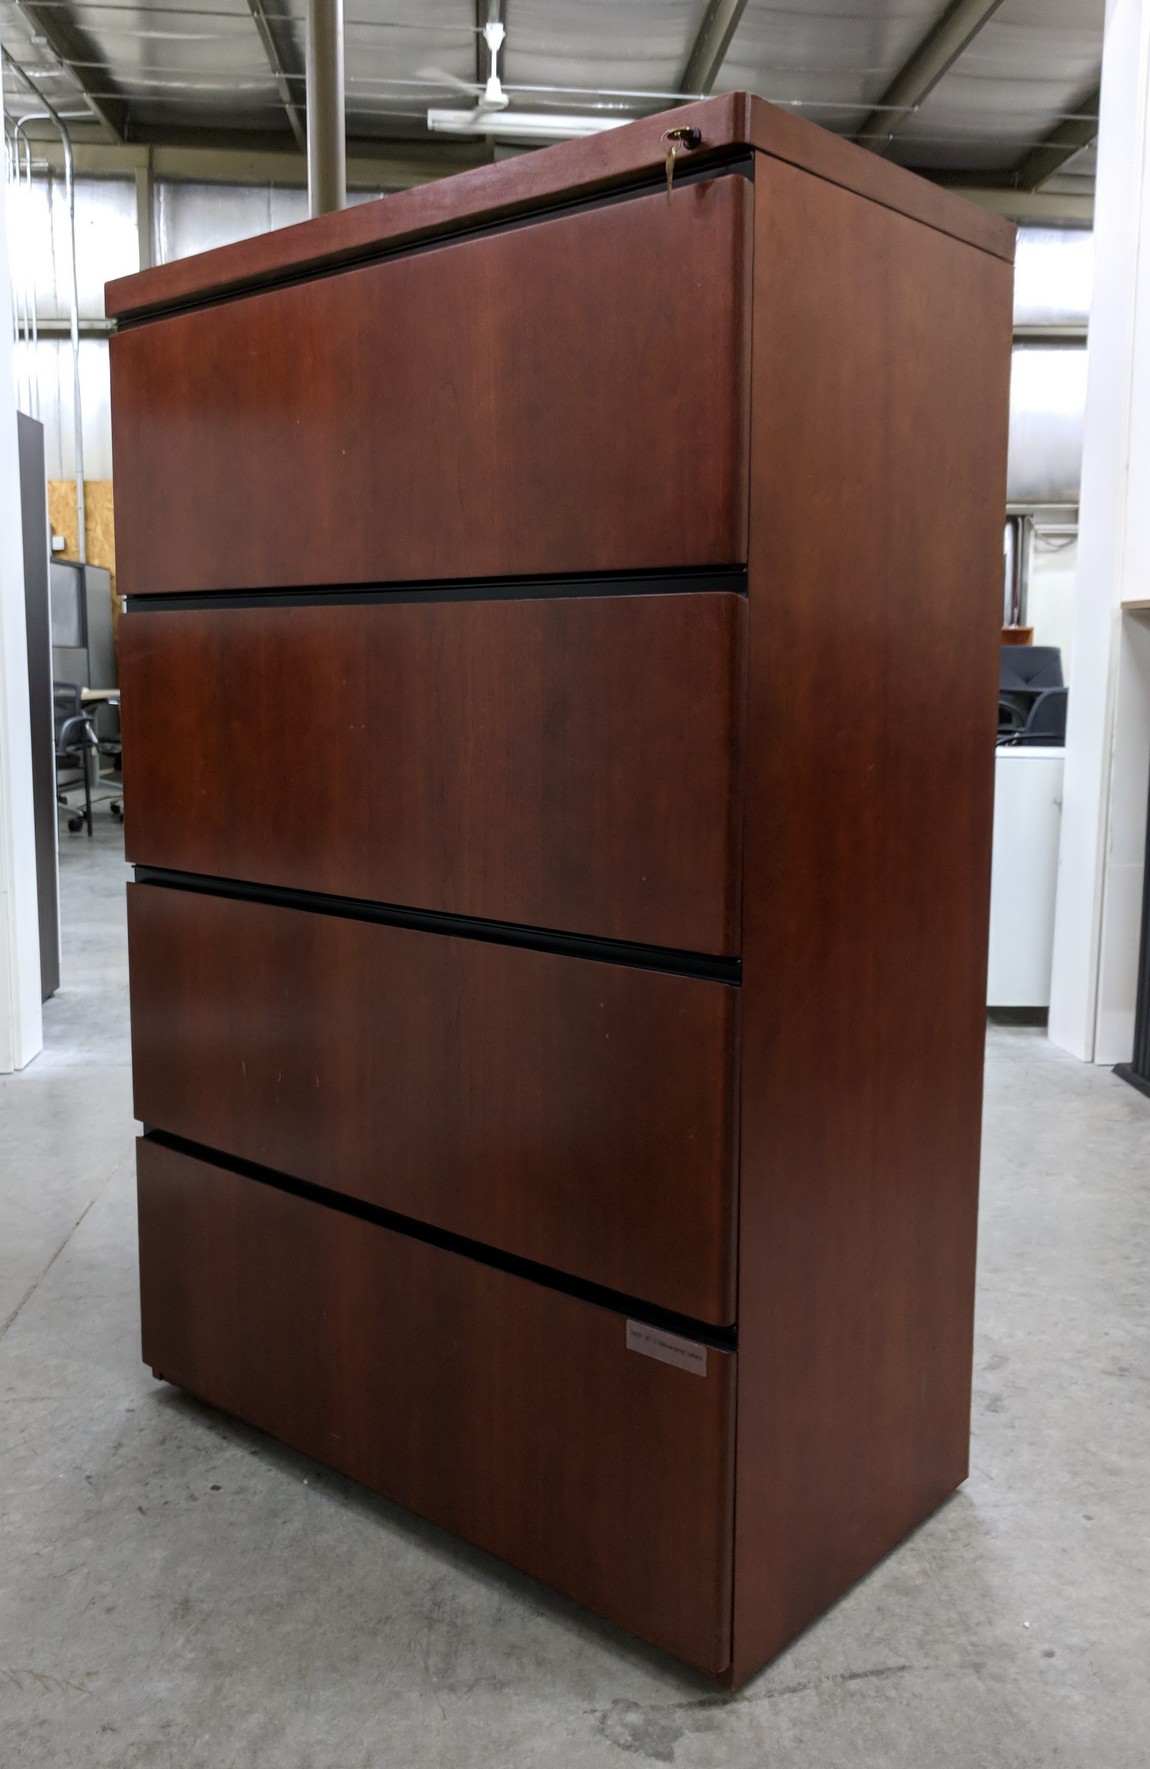 Solid Wood Cherry 4 Drawer Lateral Filing Cabinets – 36 Inch Wide